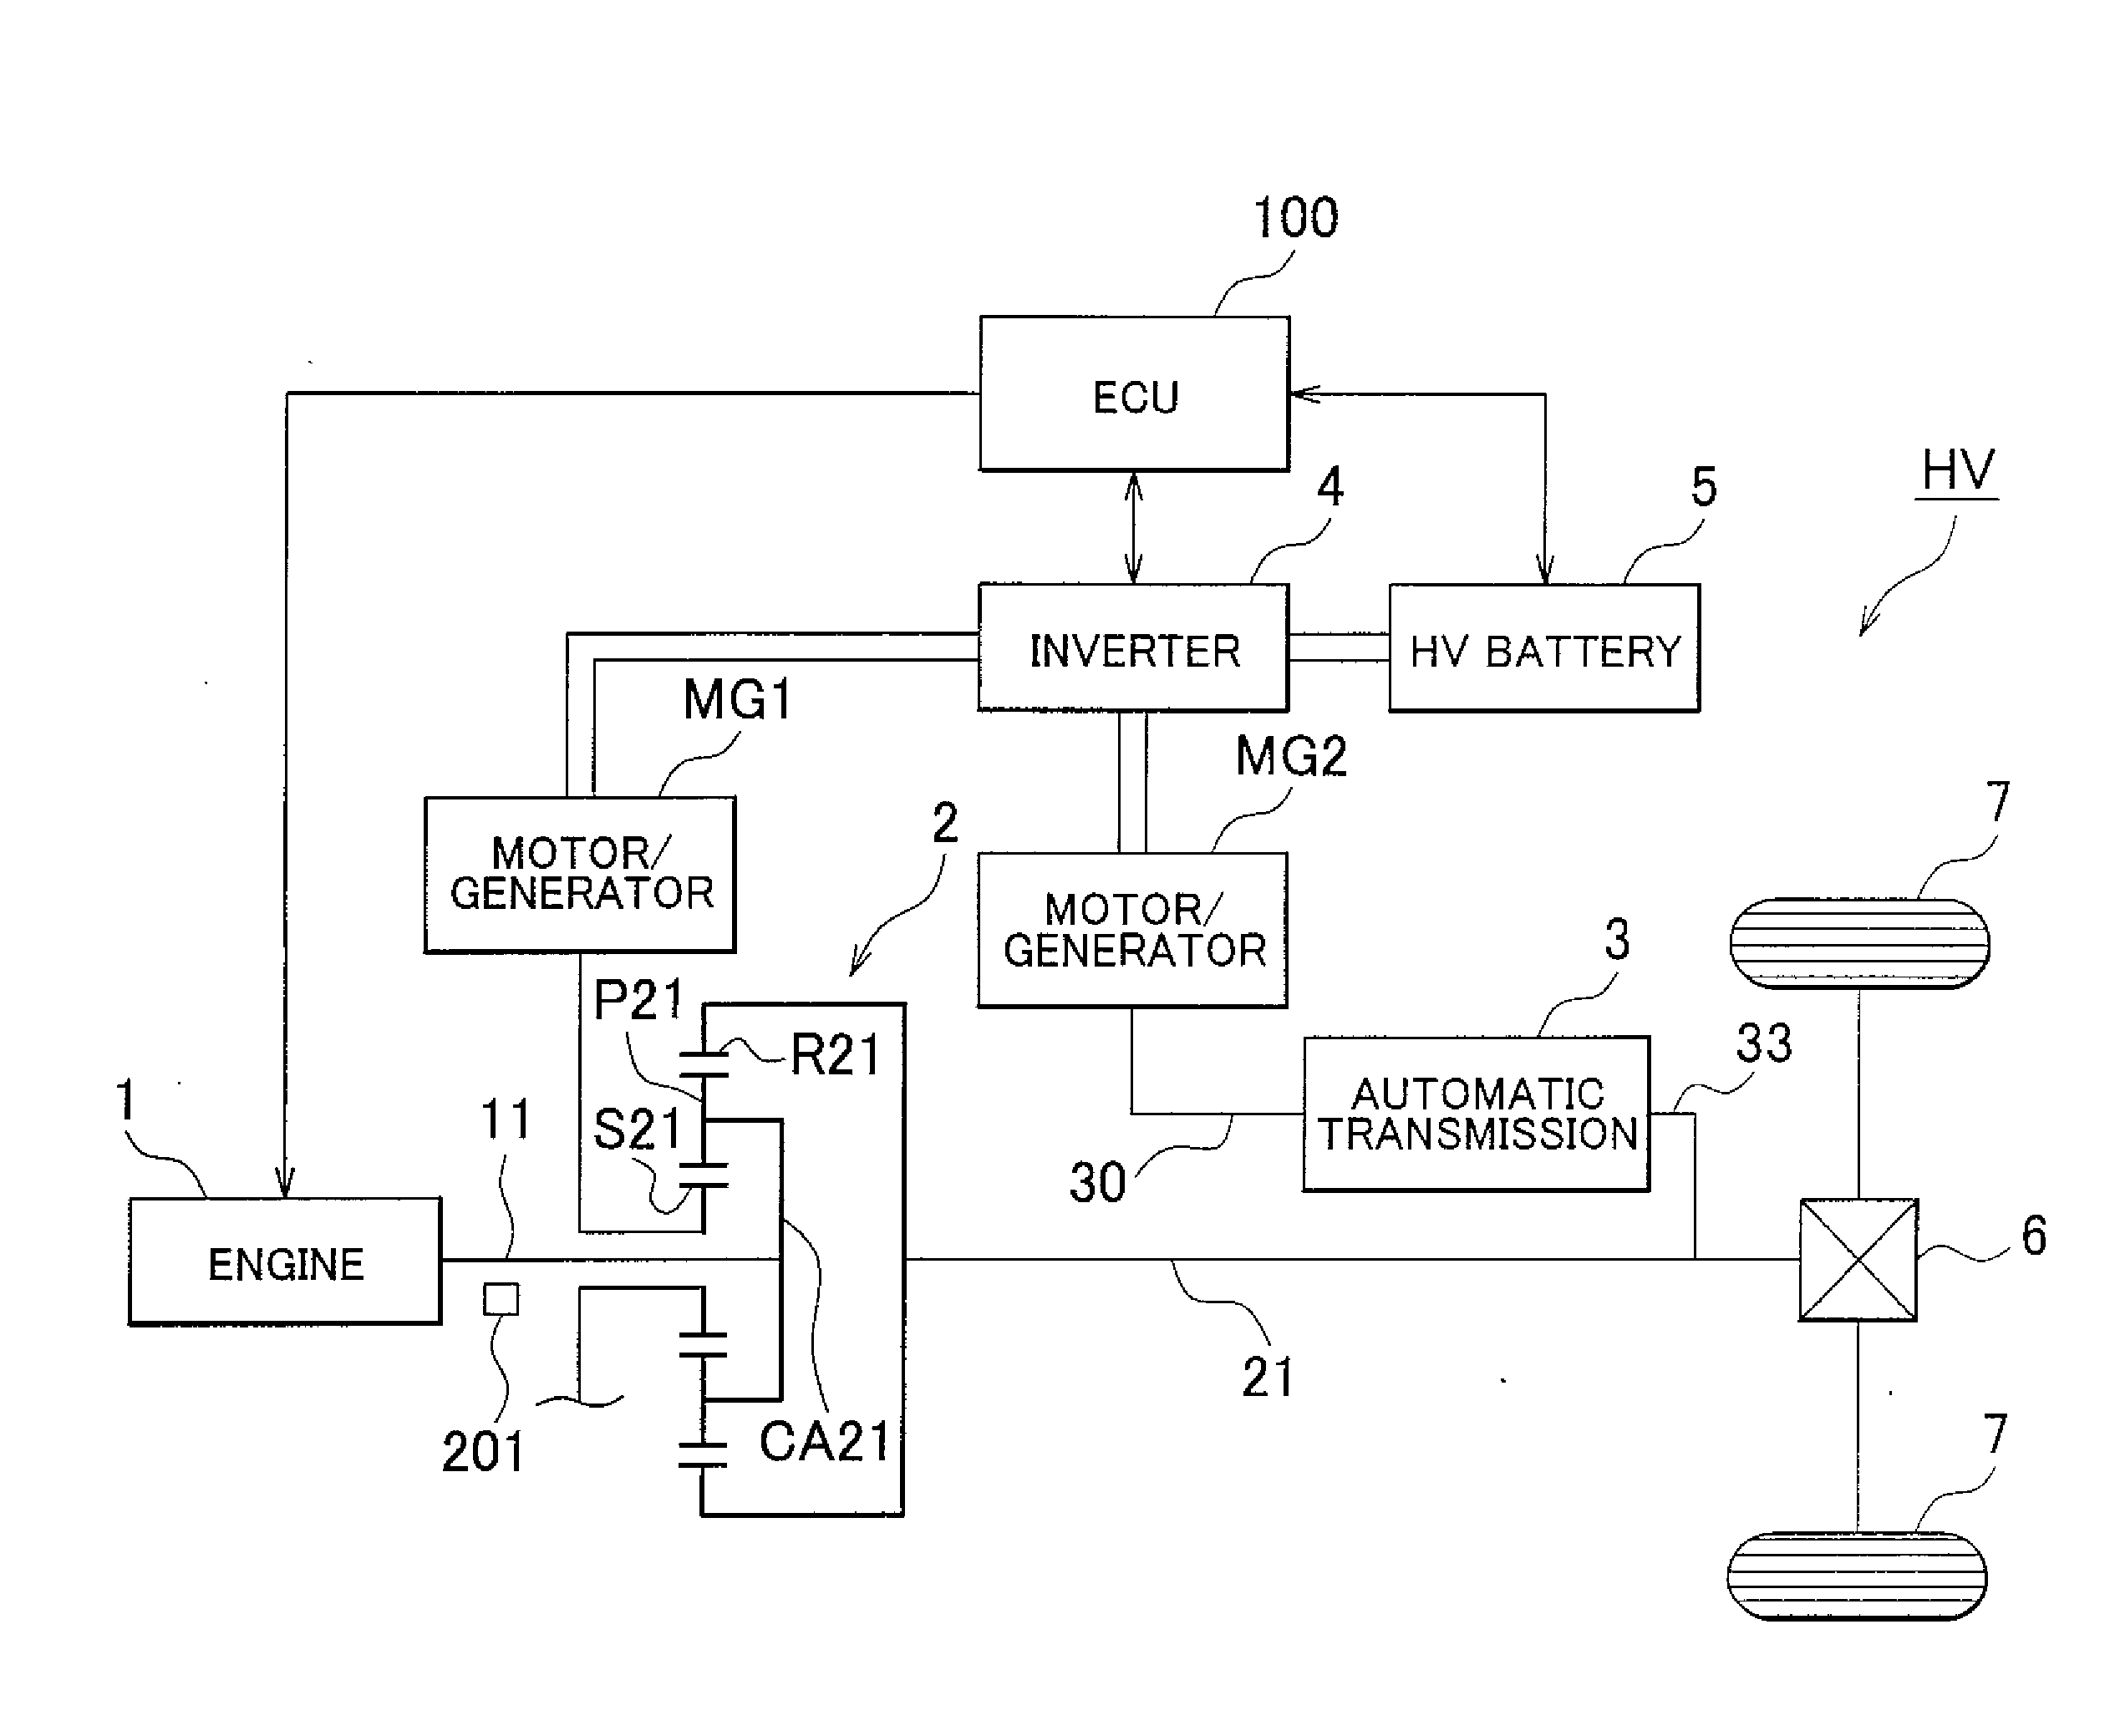 Vehicular control apparatus and control system